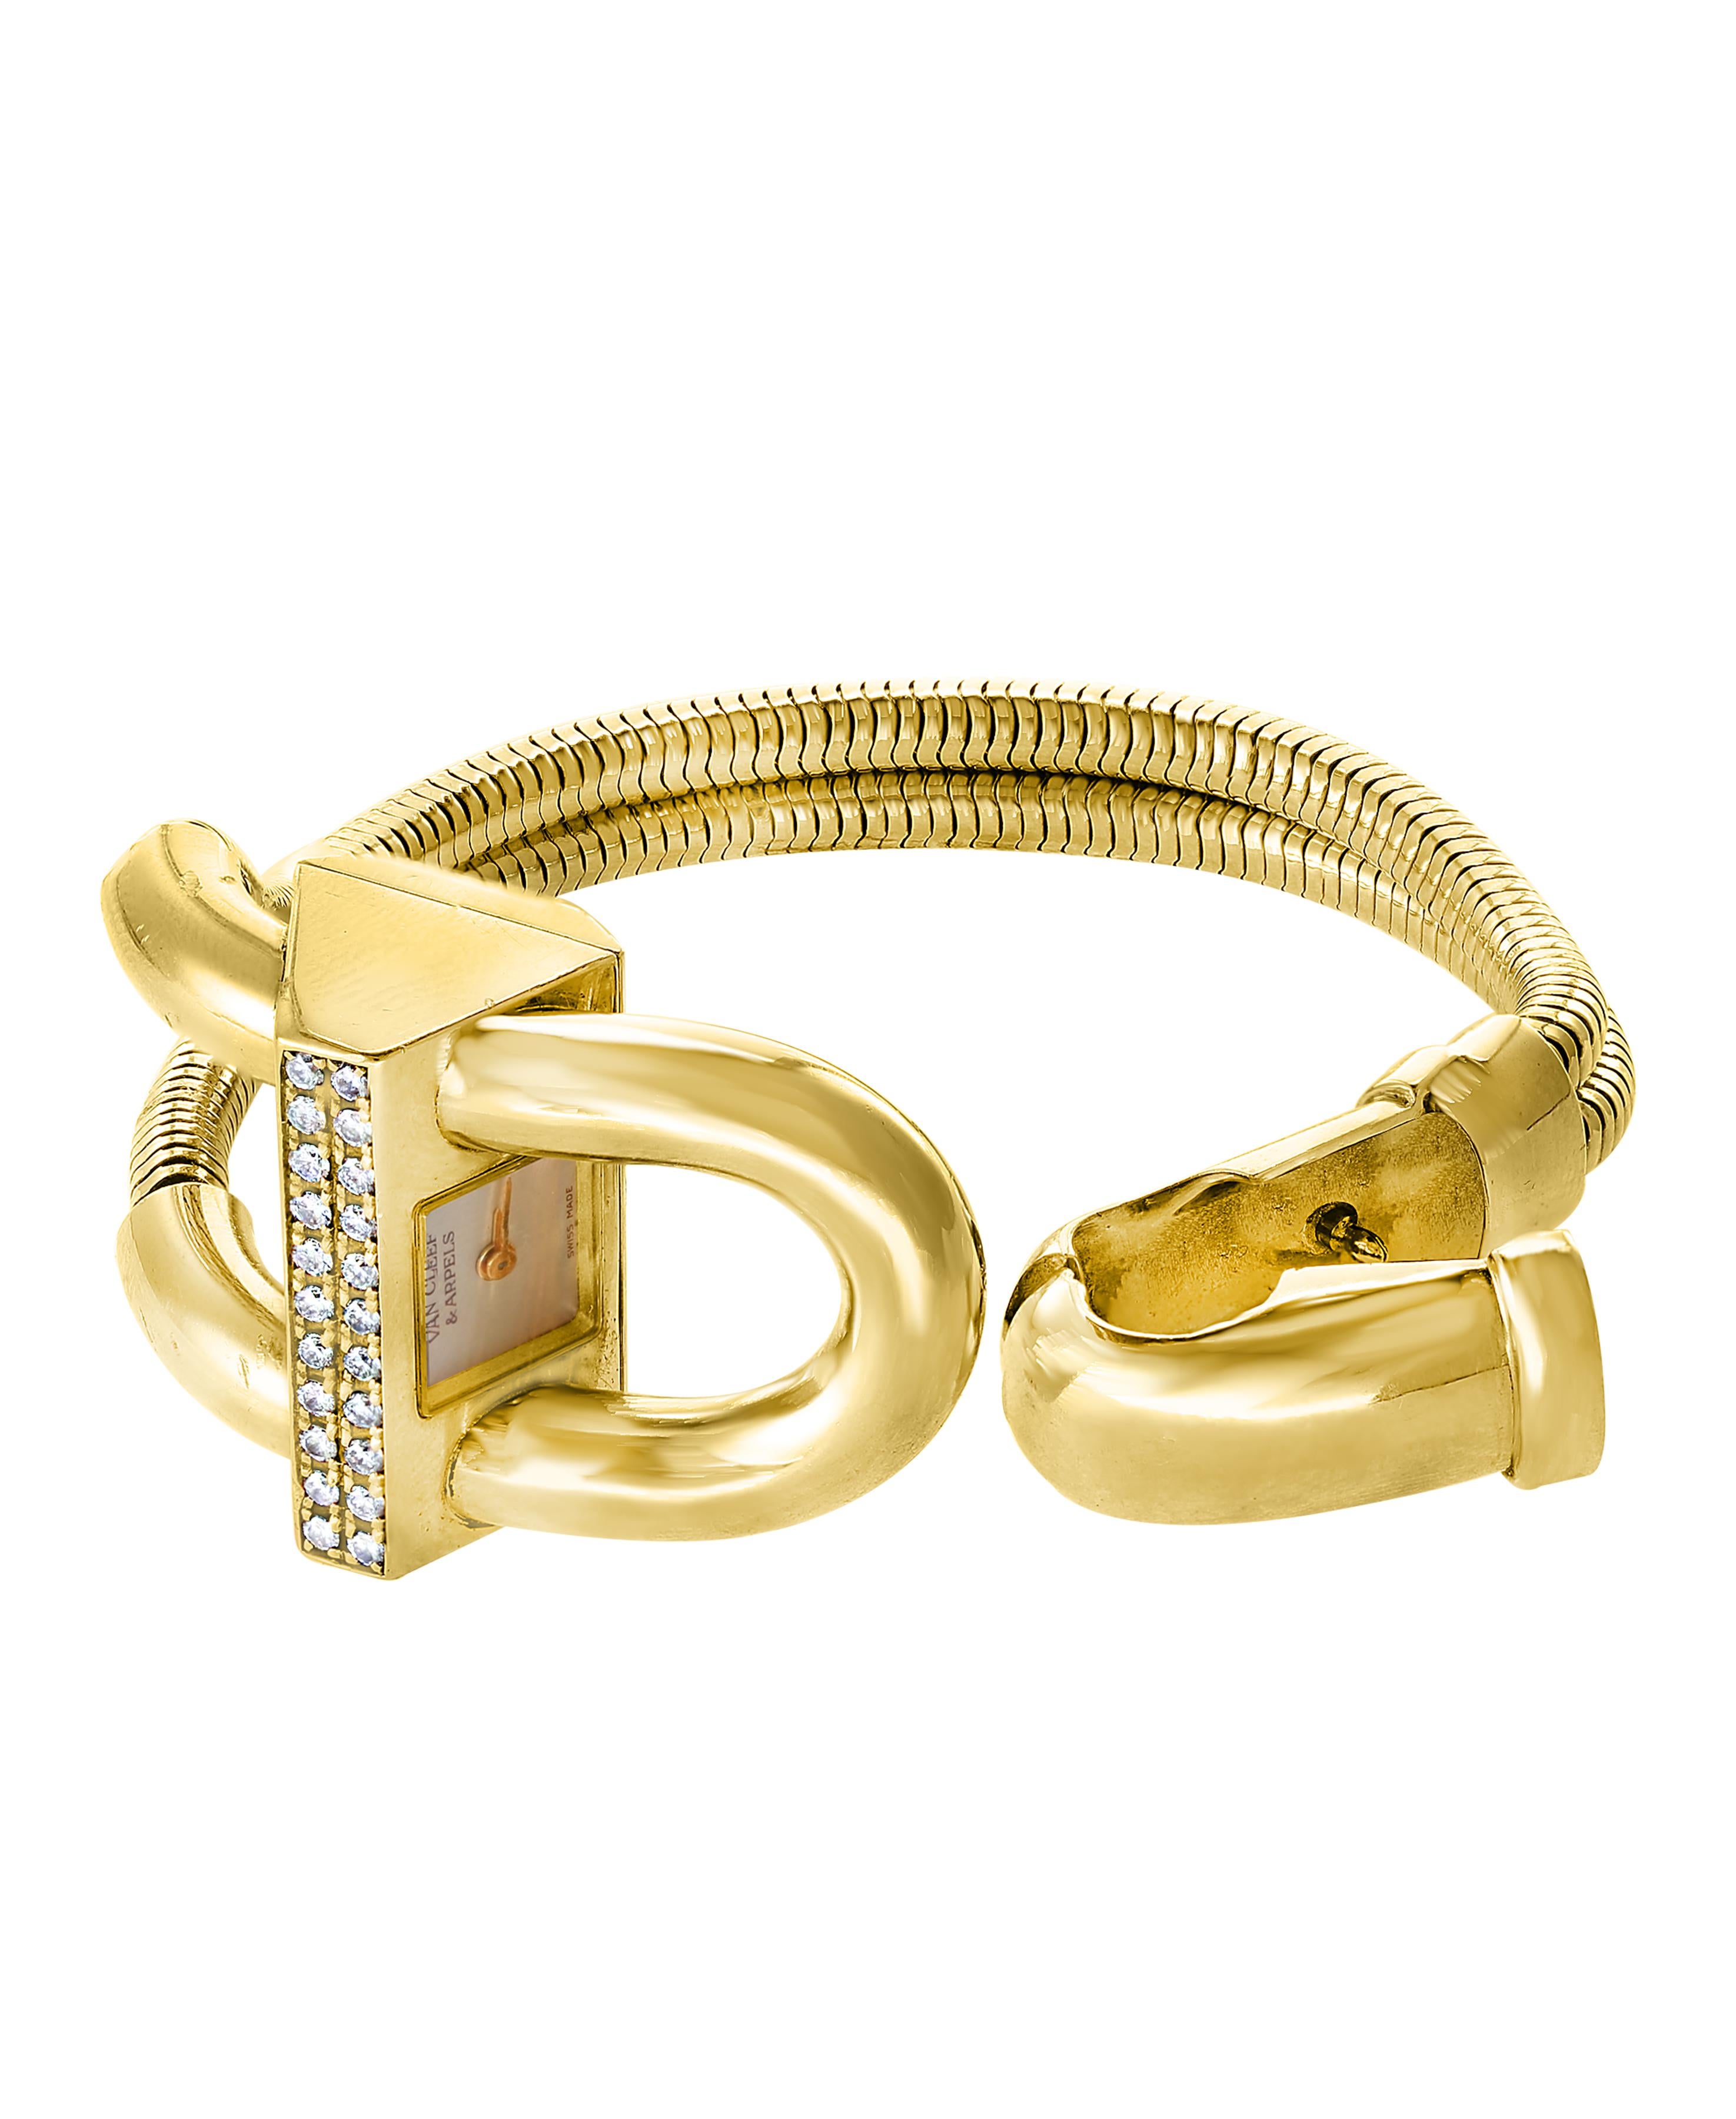  Van Cleef & Arpels Cadenas bracelet watch
6.5 inches in length
An iconic classic design from Van Cleef & Arpels, the Cadenas watch is a timeless statement of elegance and grace. This watch, crafted in simple and tasteful 18k yellow gold 79 Grams.